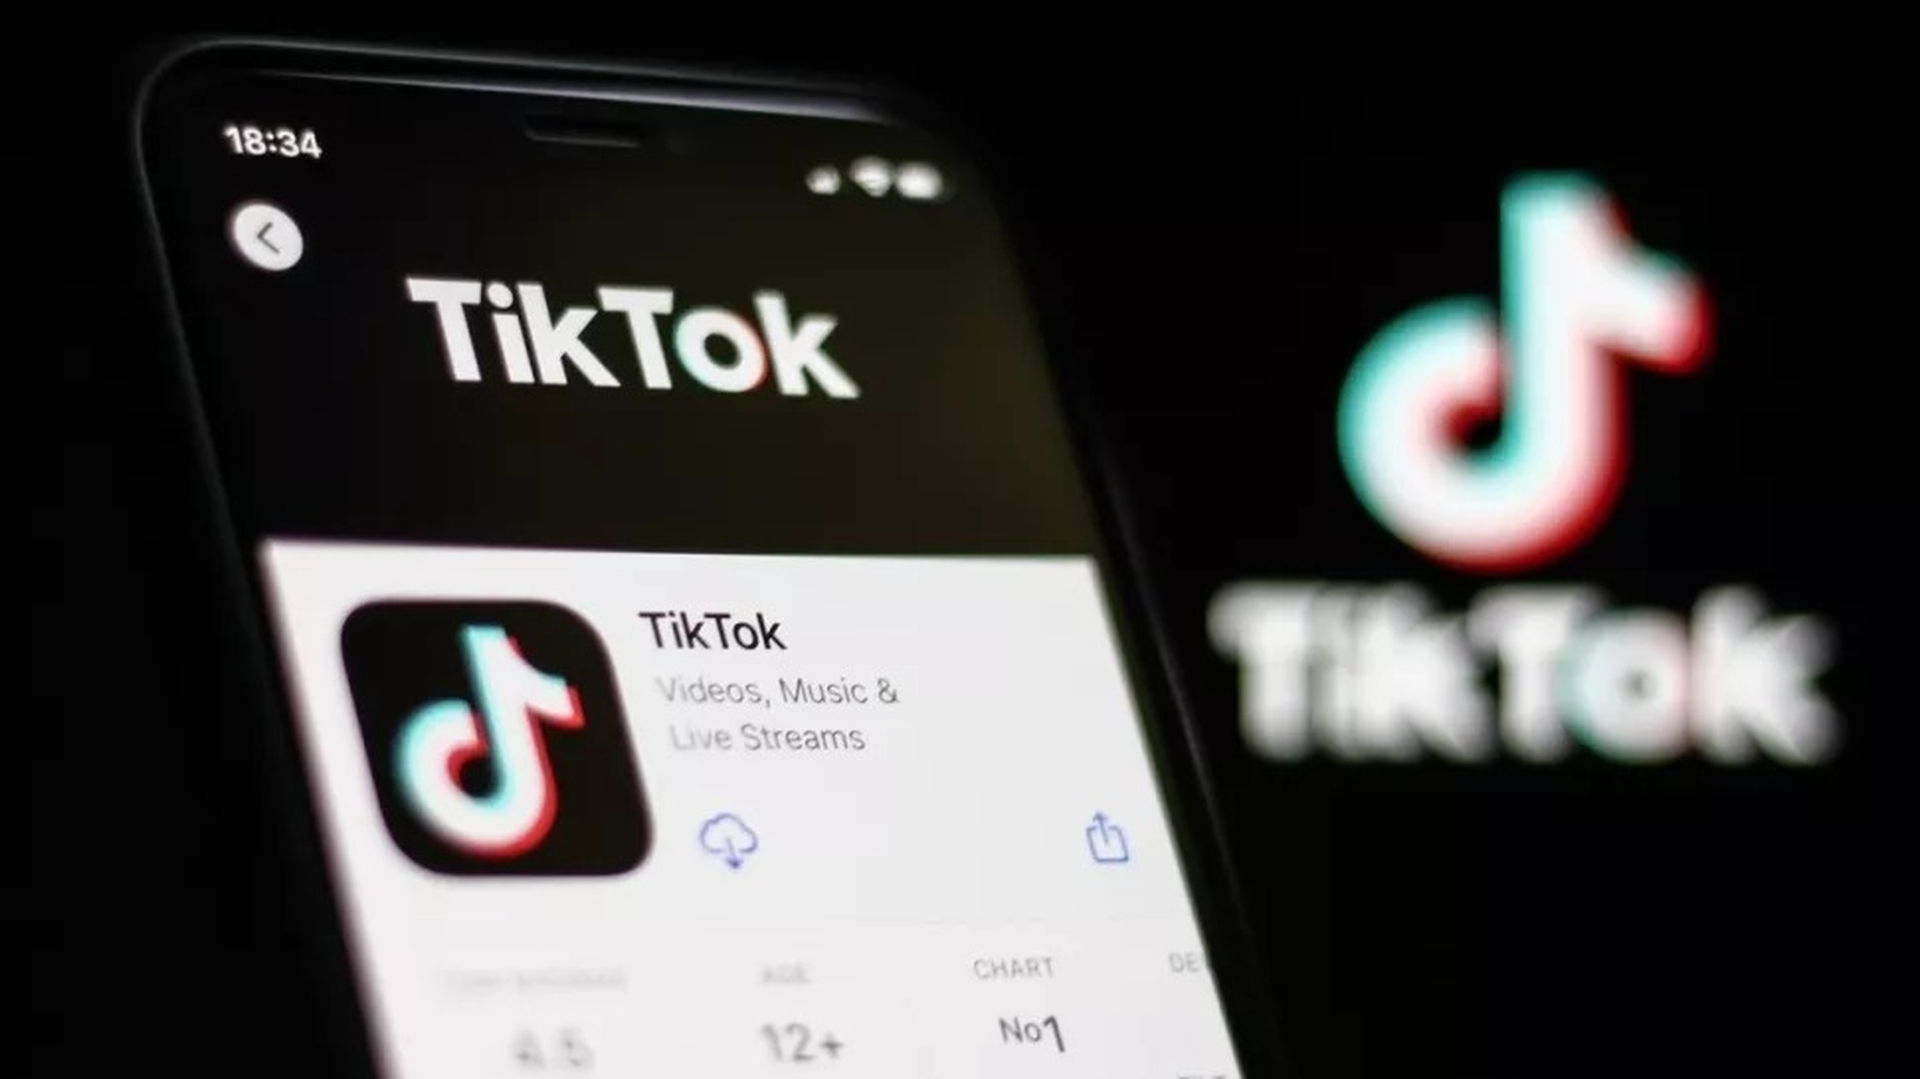 In this article, we are going to go over how to get blue eye filter on TikTok, so you can see what it would be like if you had blue eyes and don't fall for the S5 trick.